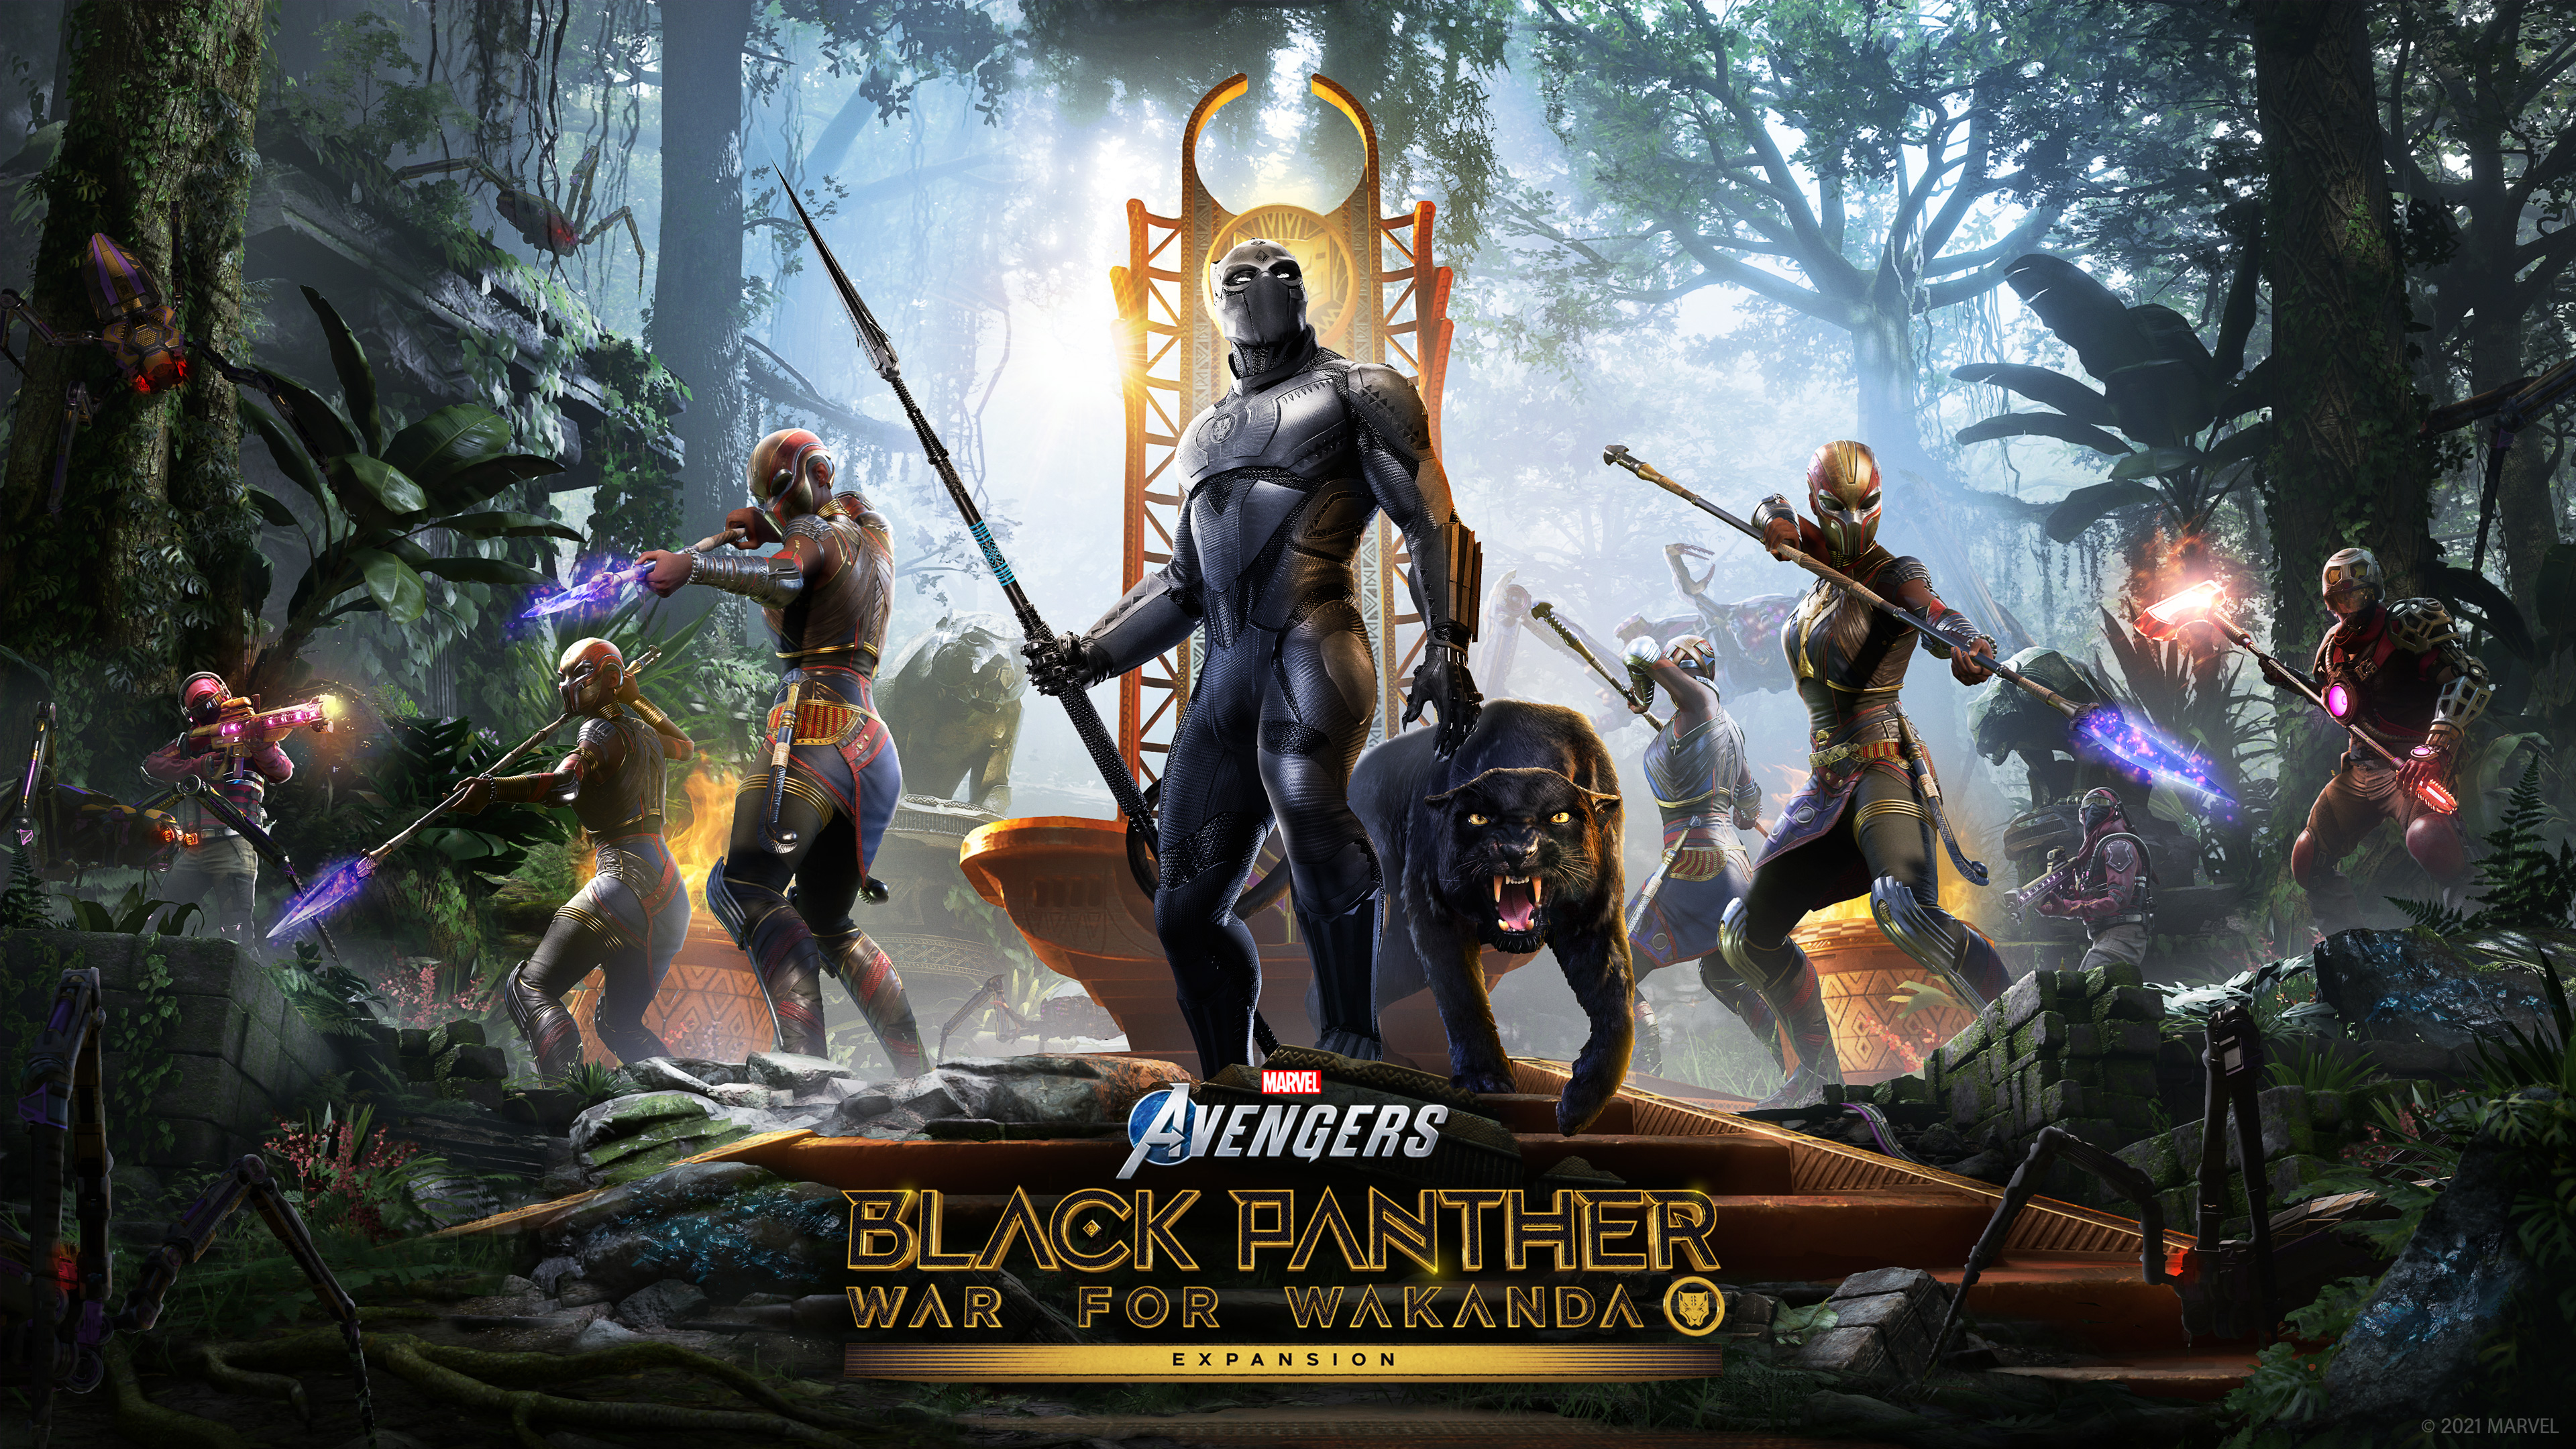 Peep Some of T'Challa's Fits In The Upcoming 'War For Wakanda' Expansion